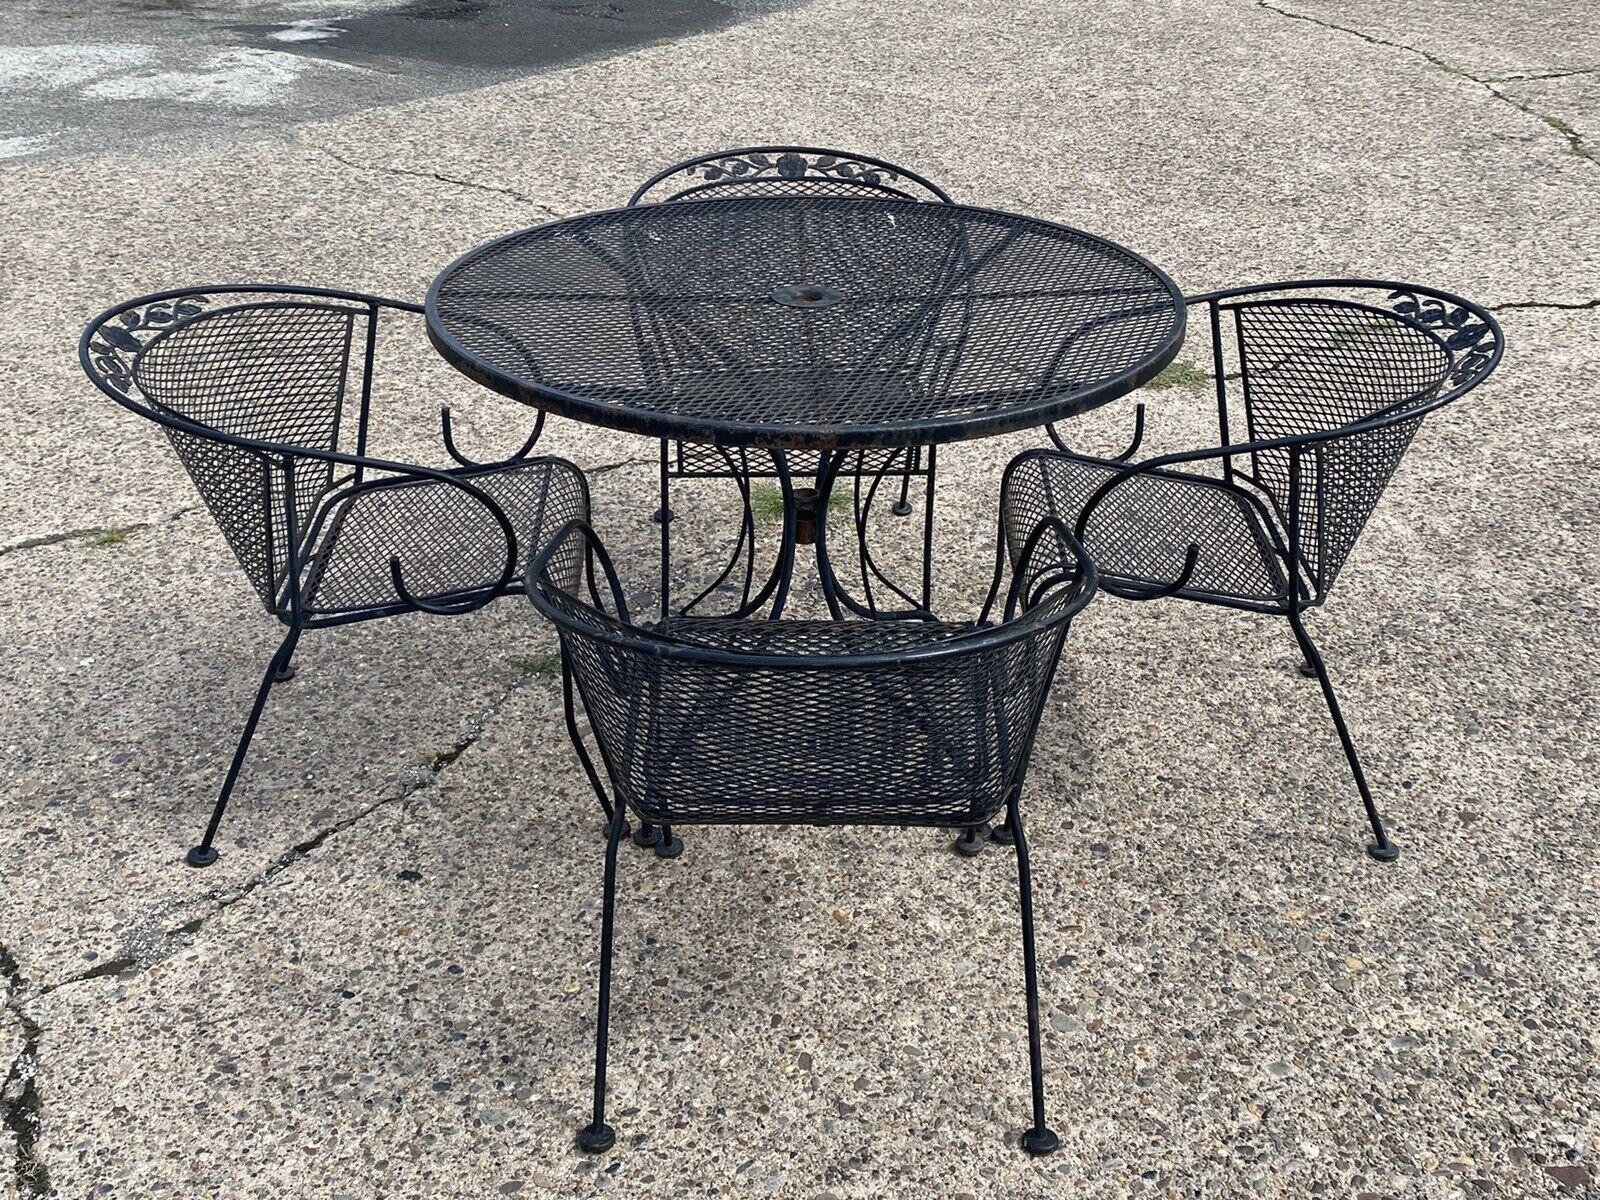 Vintage Wrought Iron Scroll Arm Garden Patio Dining Set 4 Chairs, 5pc Set 7